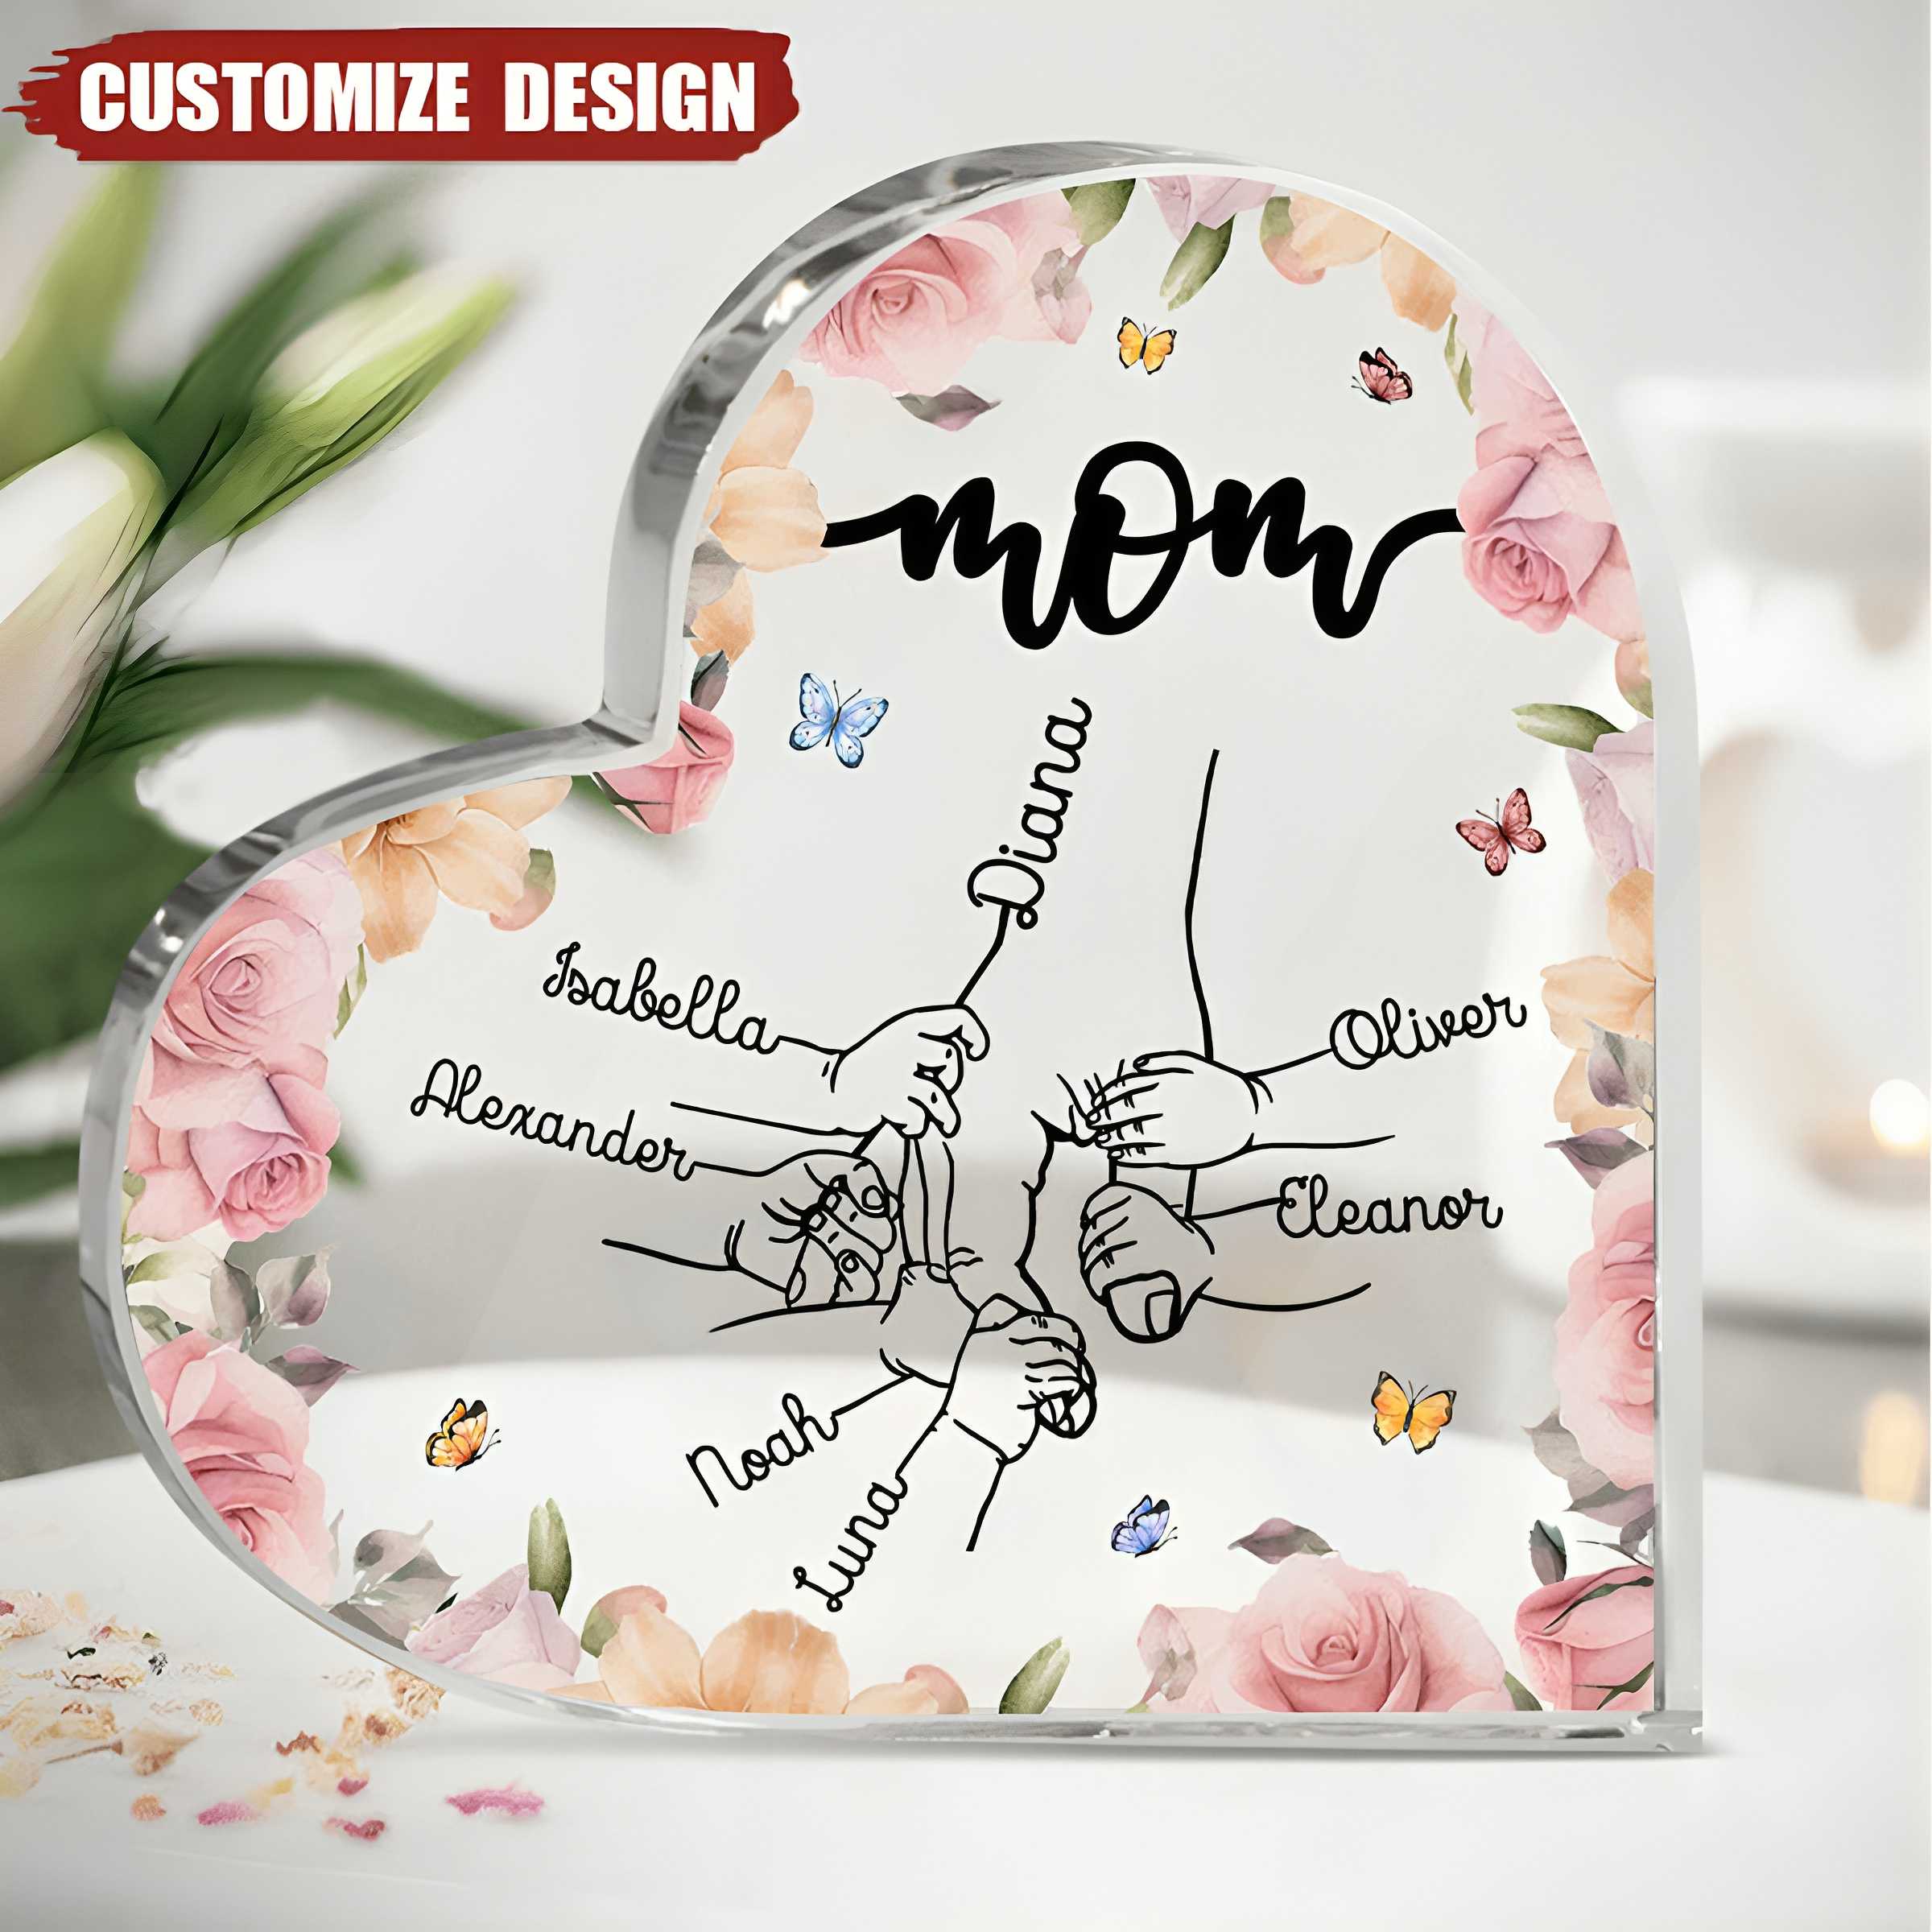 Holding Mom's Hand - Personalized Acrylic Plaque